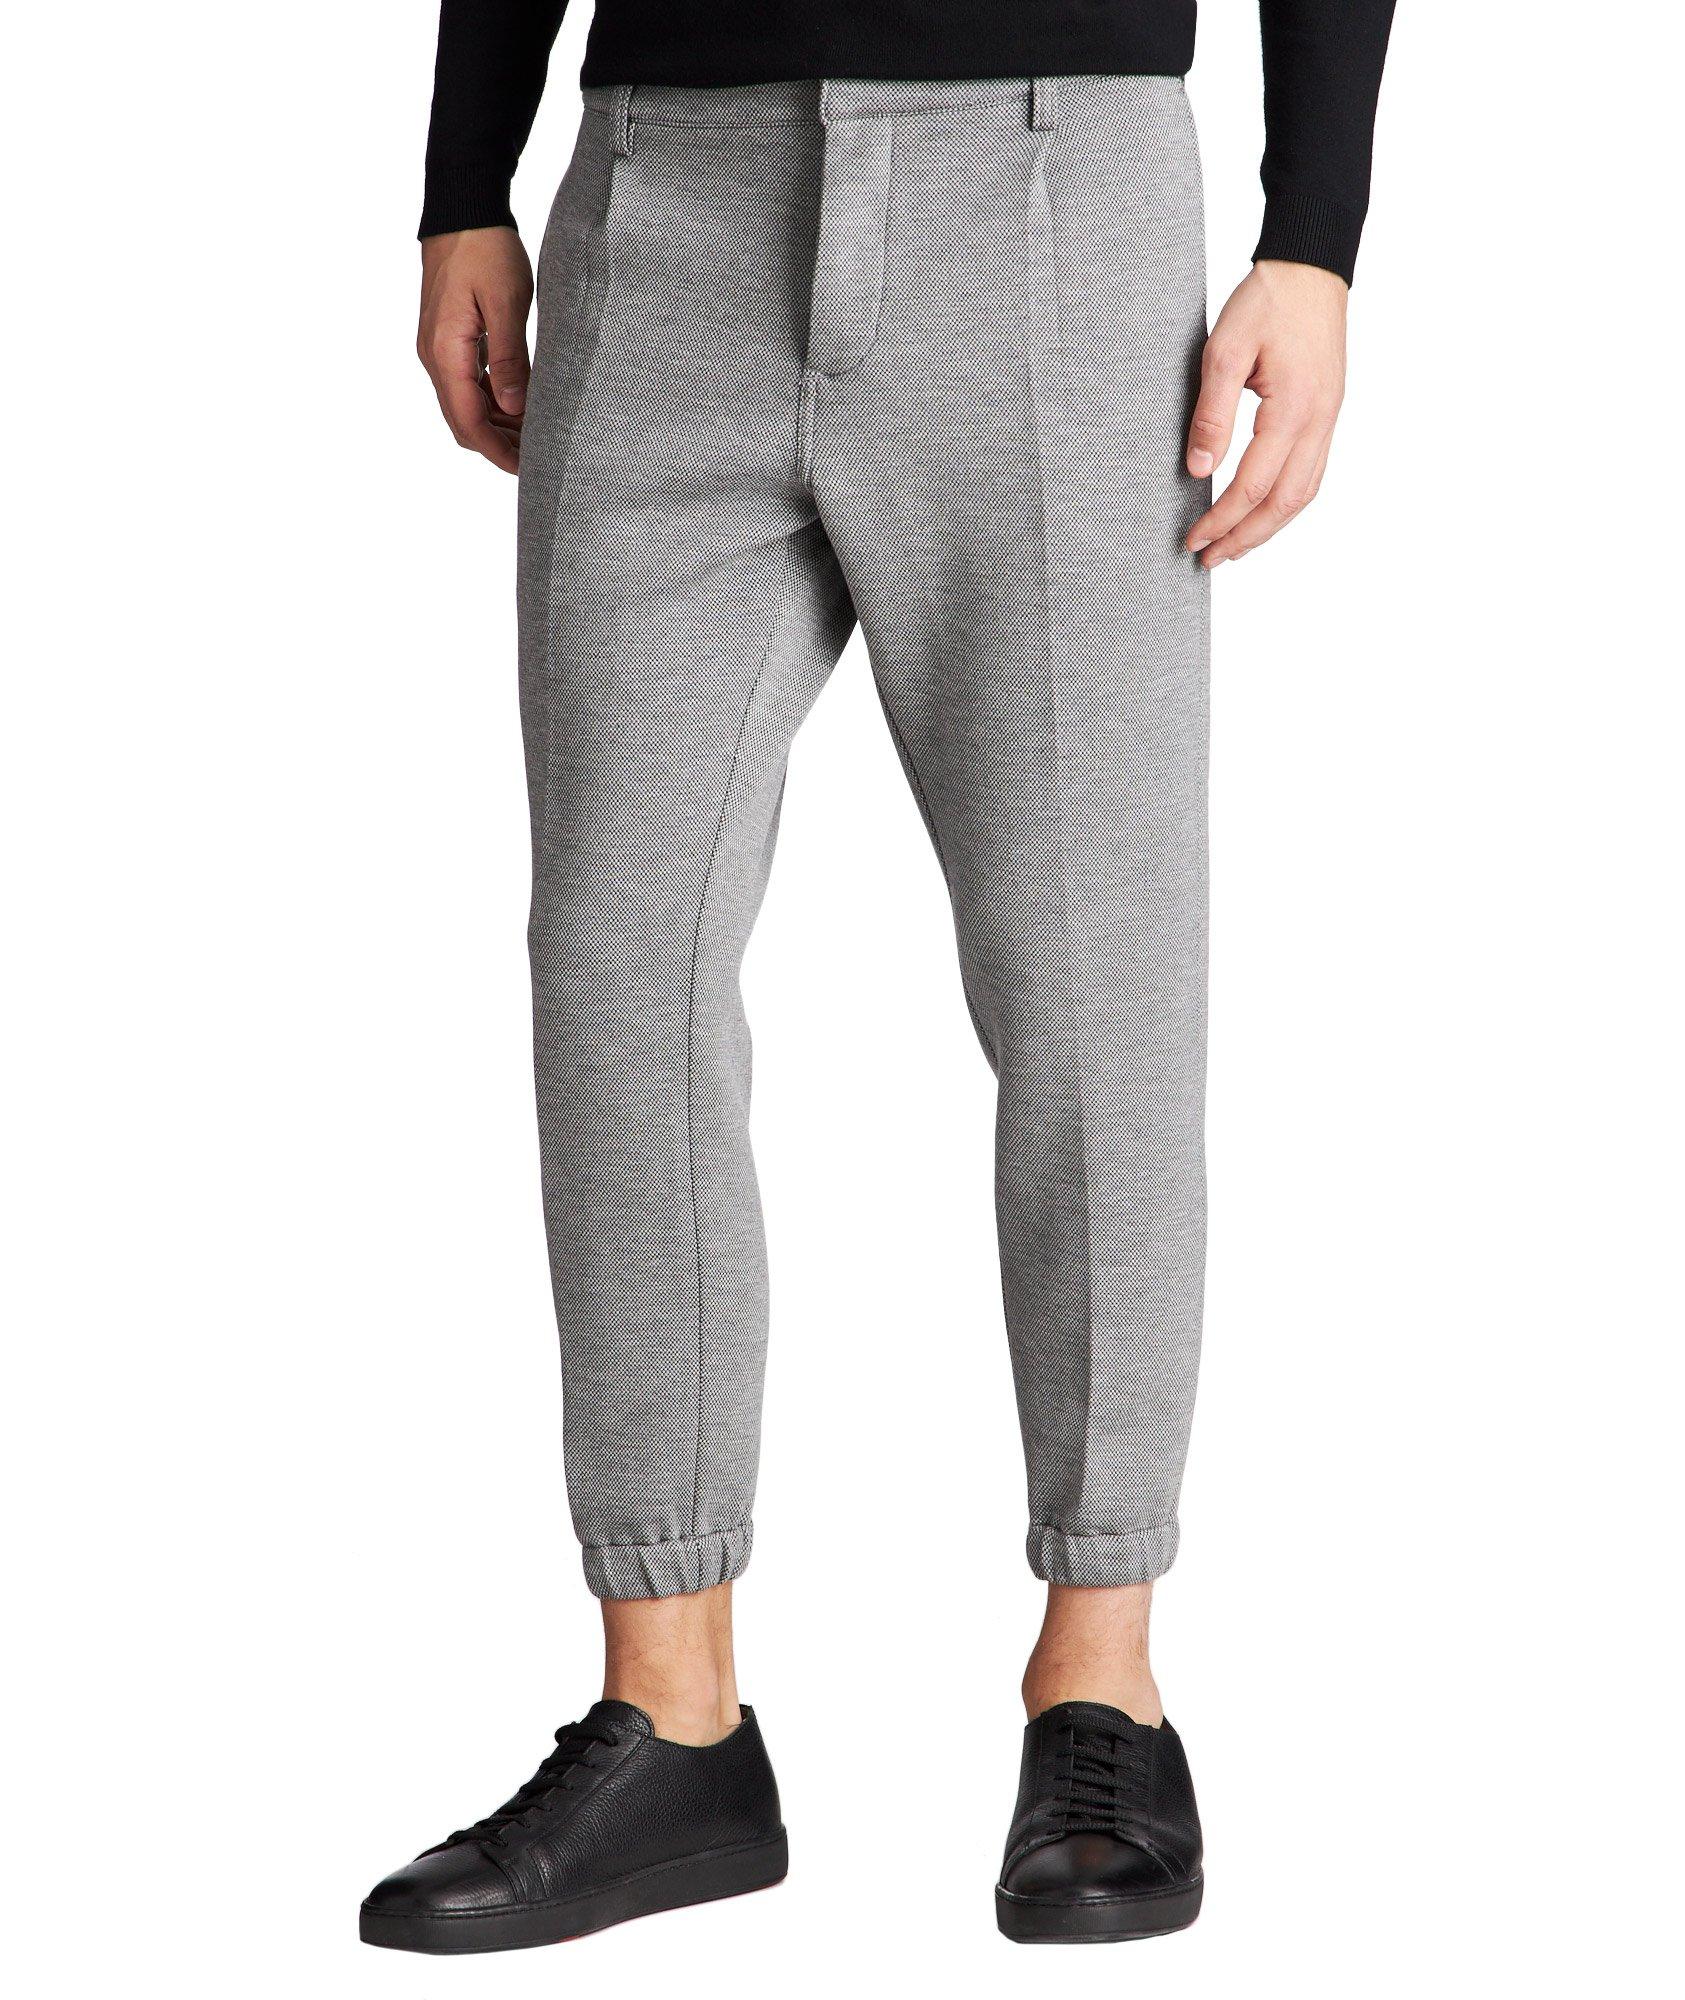 Micro-Checked Pleated Joggers image 0